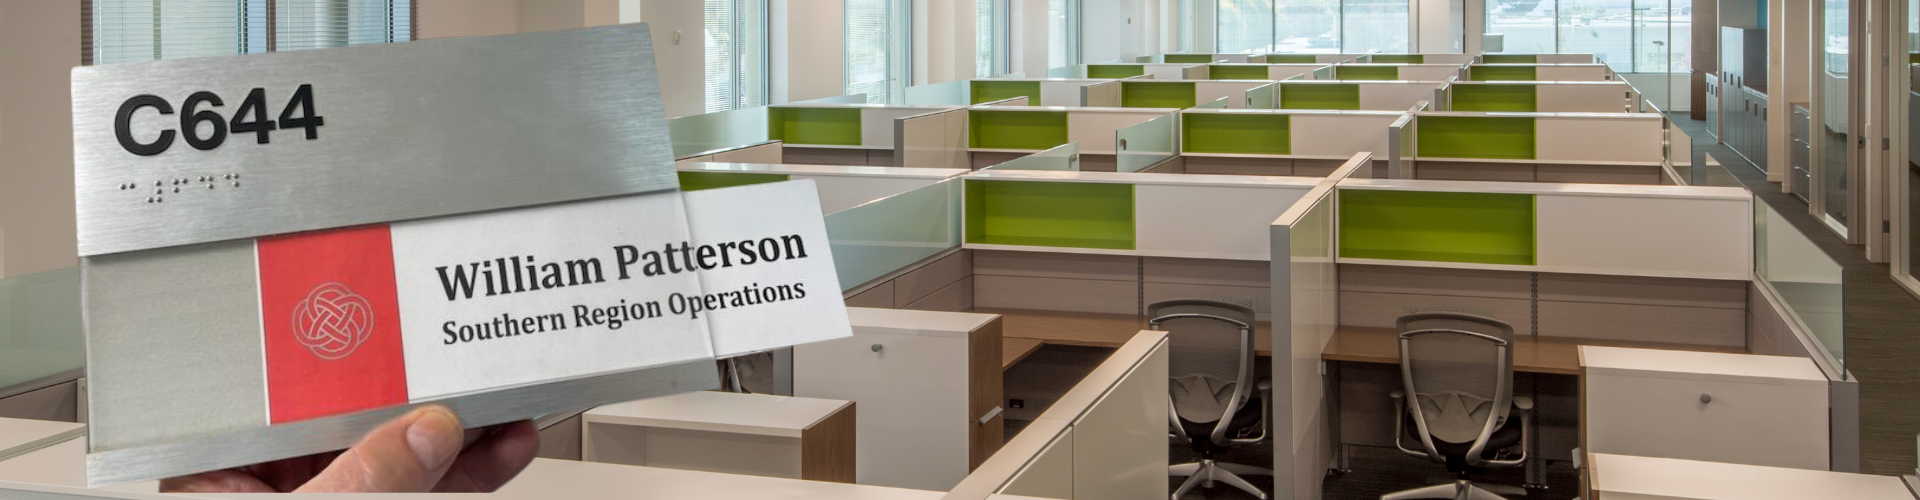 Cubicle sign fabricated by Stanco Signage for office workstation.